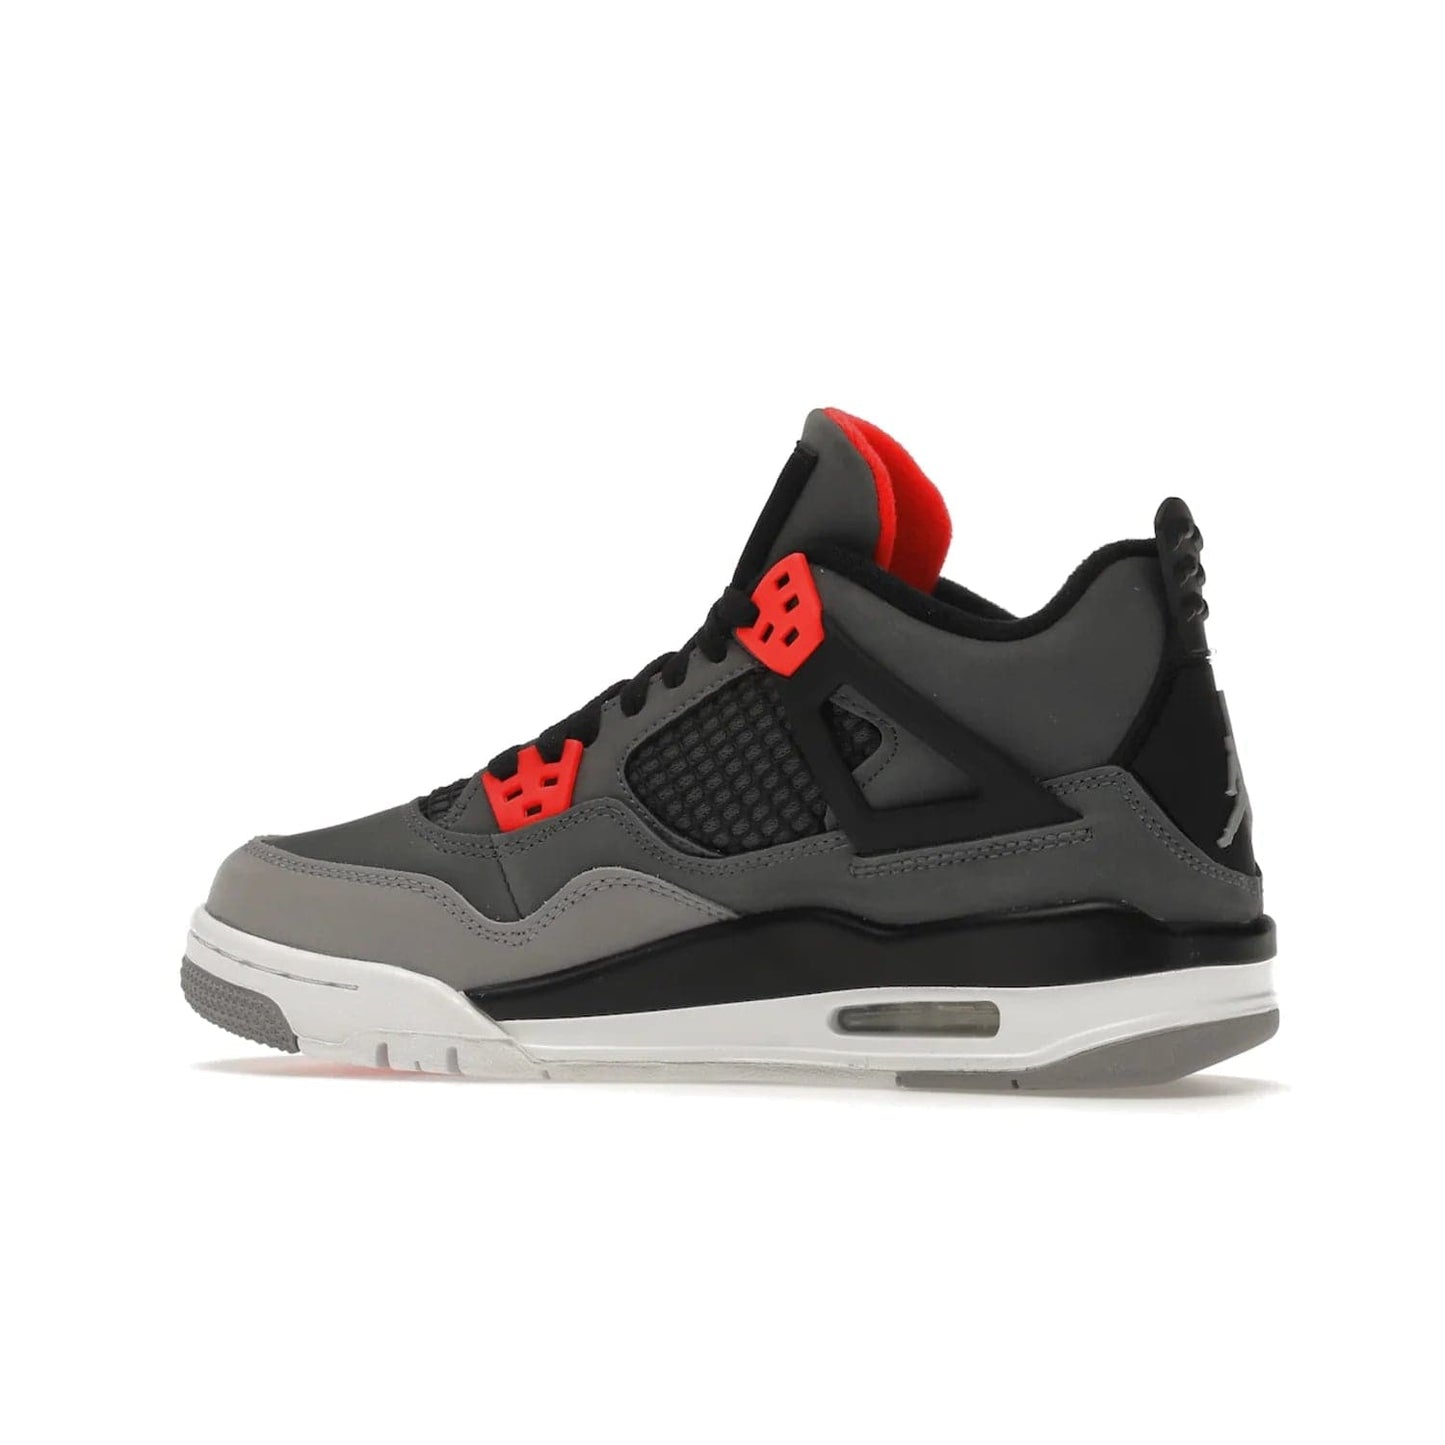 Jordan 4 Retro Infrared (GS) - Image 21 - Only at www.BallersClubKickz.com - Shop the Air Jordan 4 Retro Infrared (GS) for a classic silhouette with subtle yet bold features. Dark grey nubuck upper with lighter forefoot overlay, black accents, Infrared molded eyelets & woven tongue tag. Available June 2022.